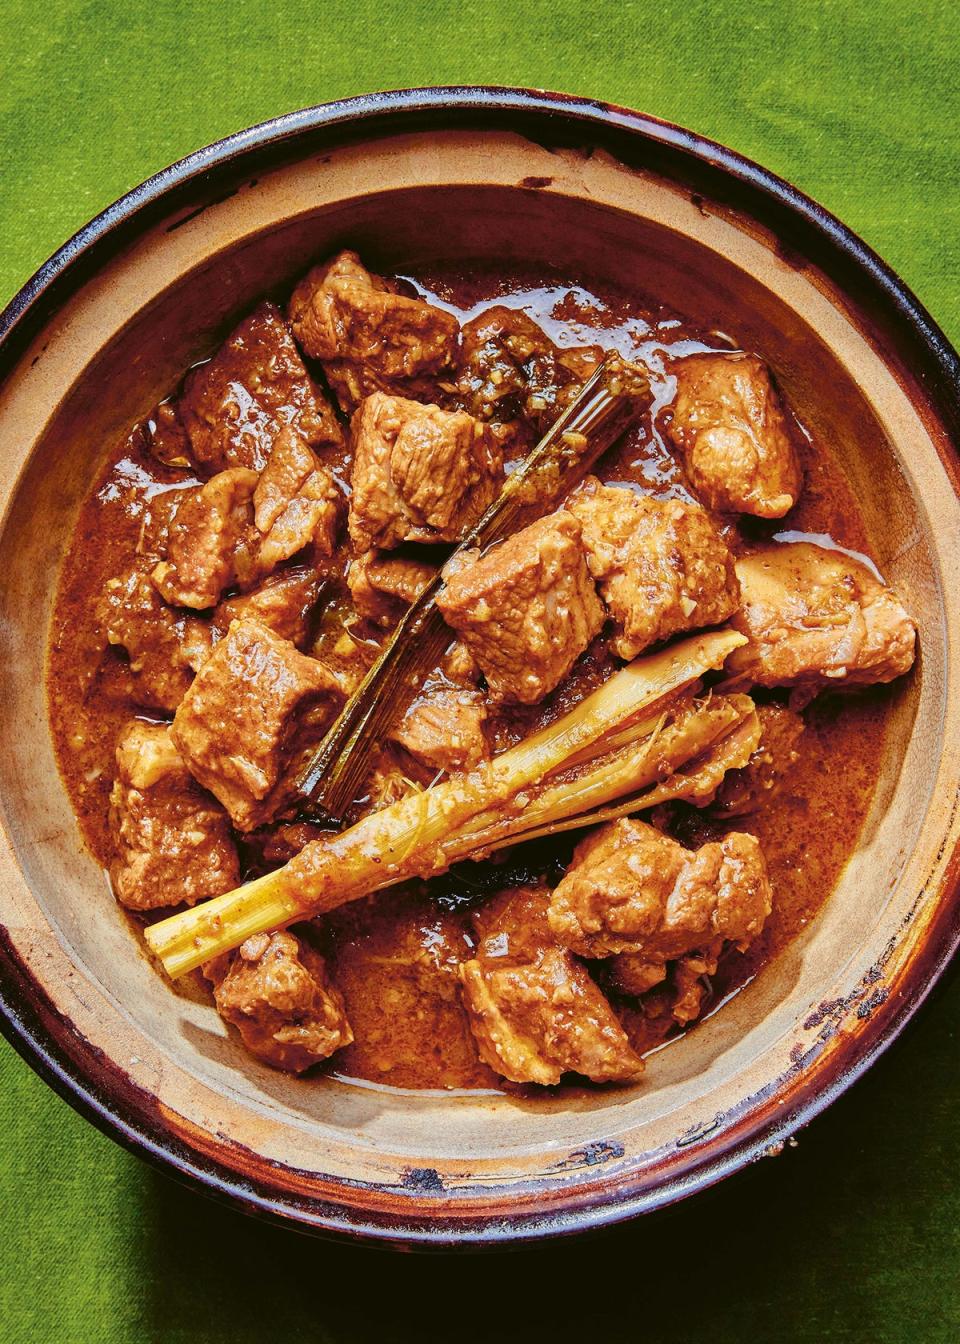 Sweet and moreish, this gently spiced curry is an homage to an old Burgher recipe (Bloomsbury)